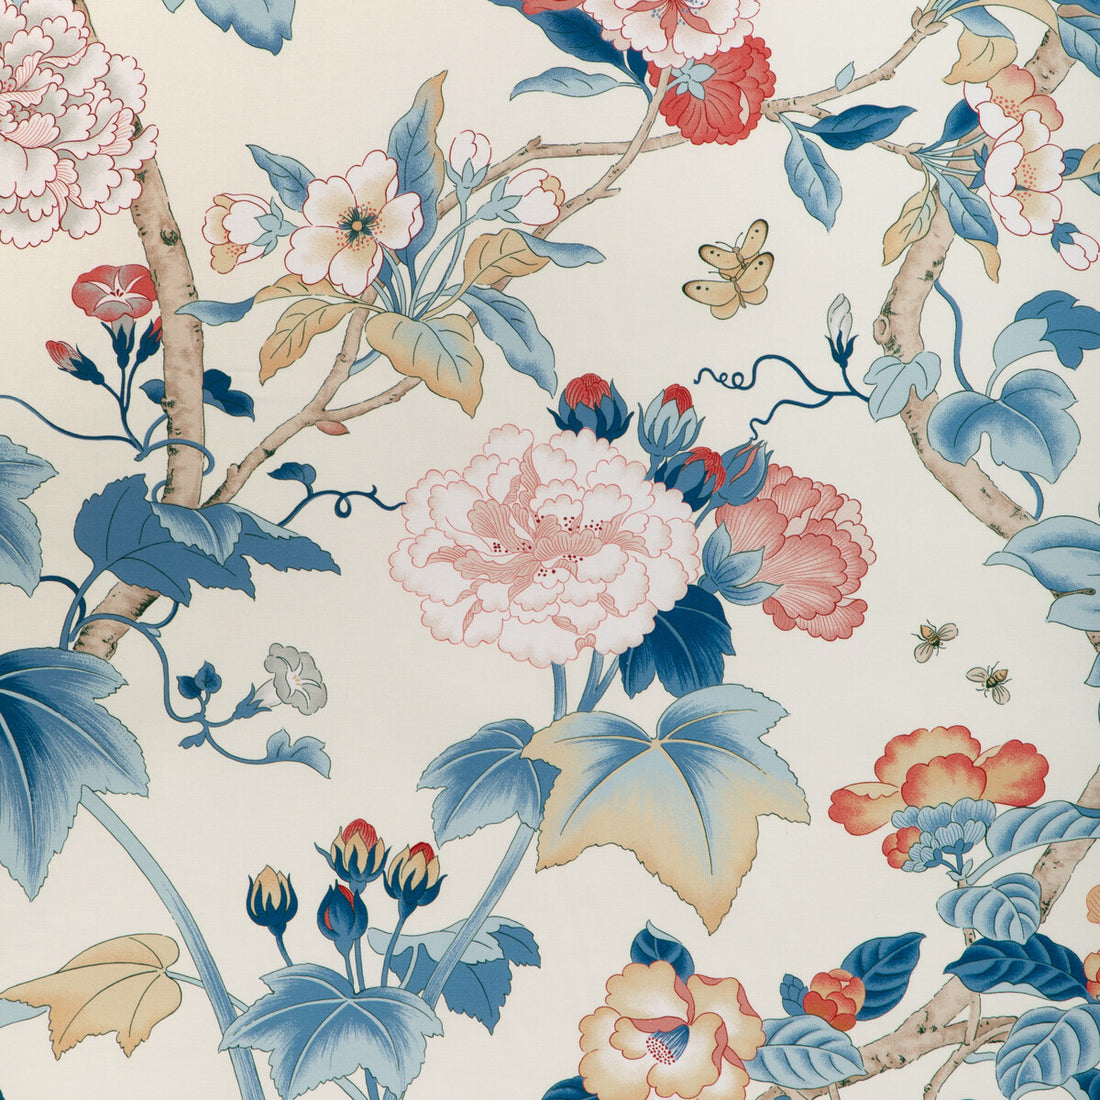 Gardenia Print fabric in blue/red color - pattern 2023143.195.0 - by Lee Jofa in the Garden Walk collection